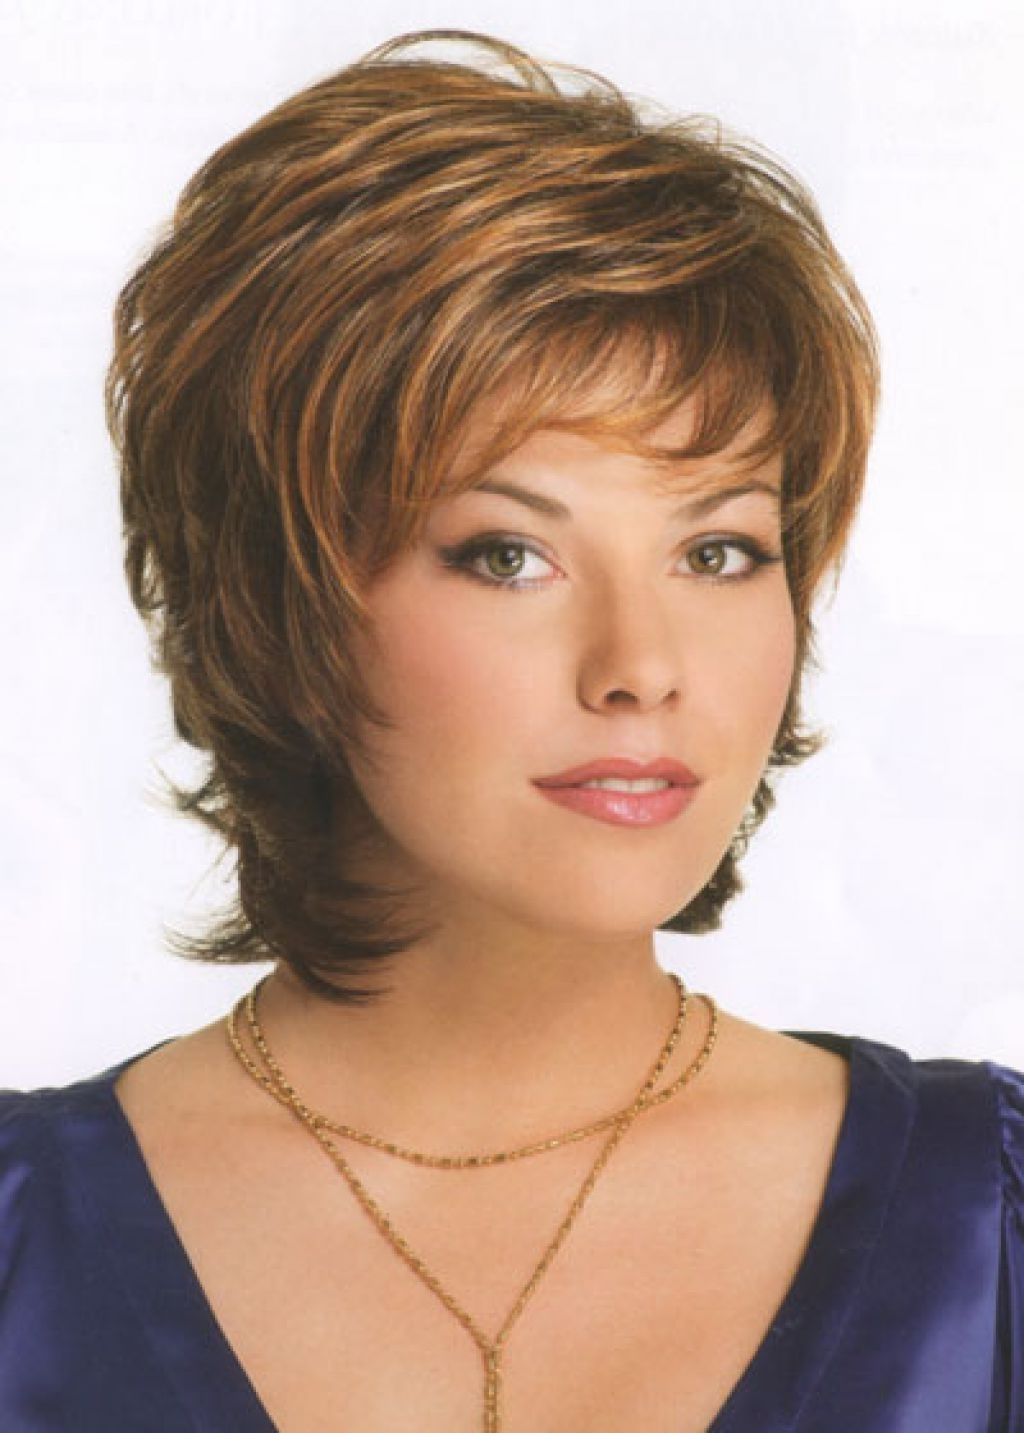 Most Recent Short Shaggy Hairstyles With Bangs Intended For Long Shag Hairstyles With Bangs (View 4 of 15)